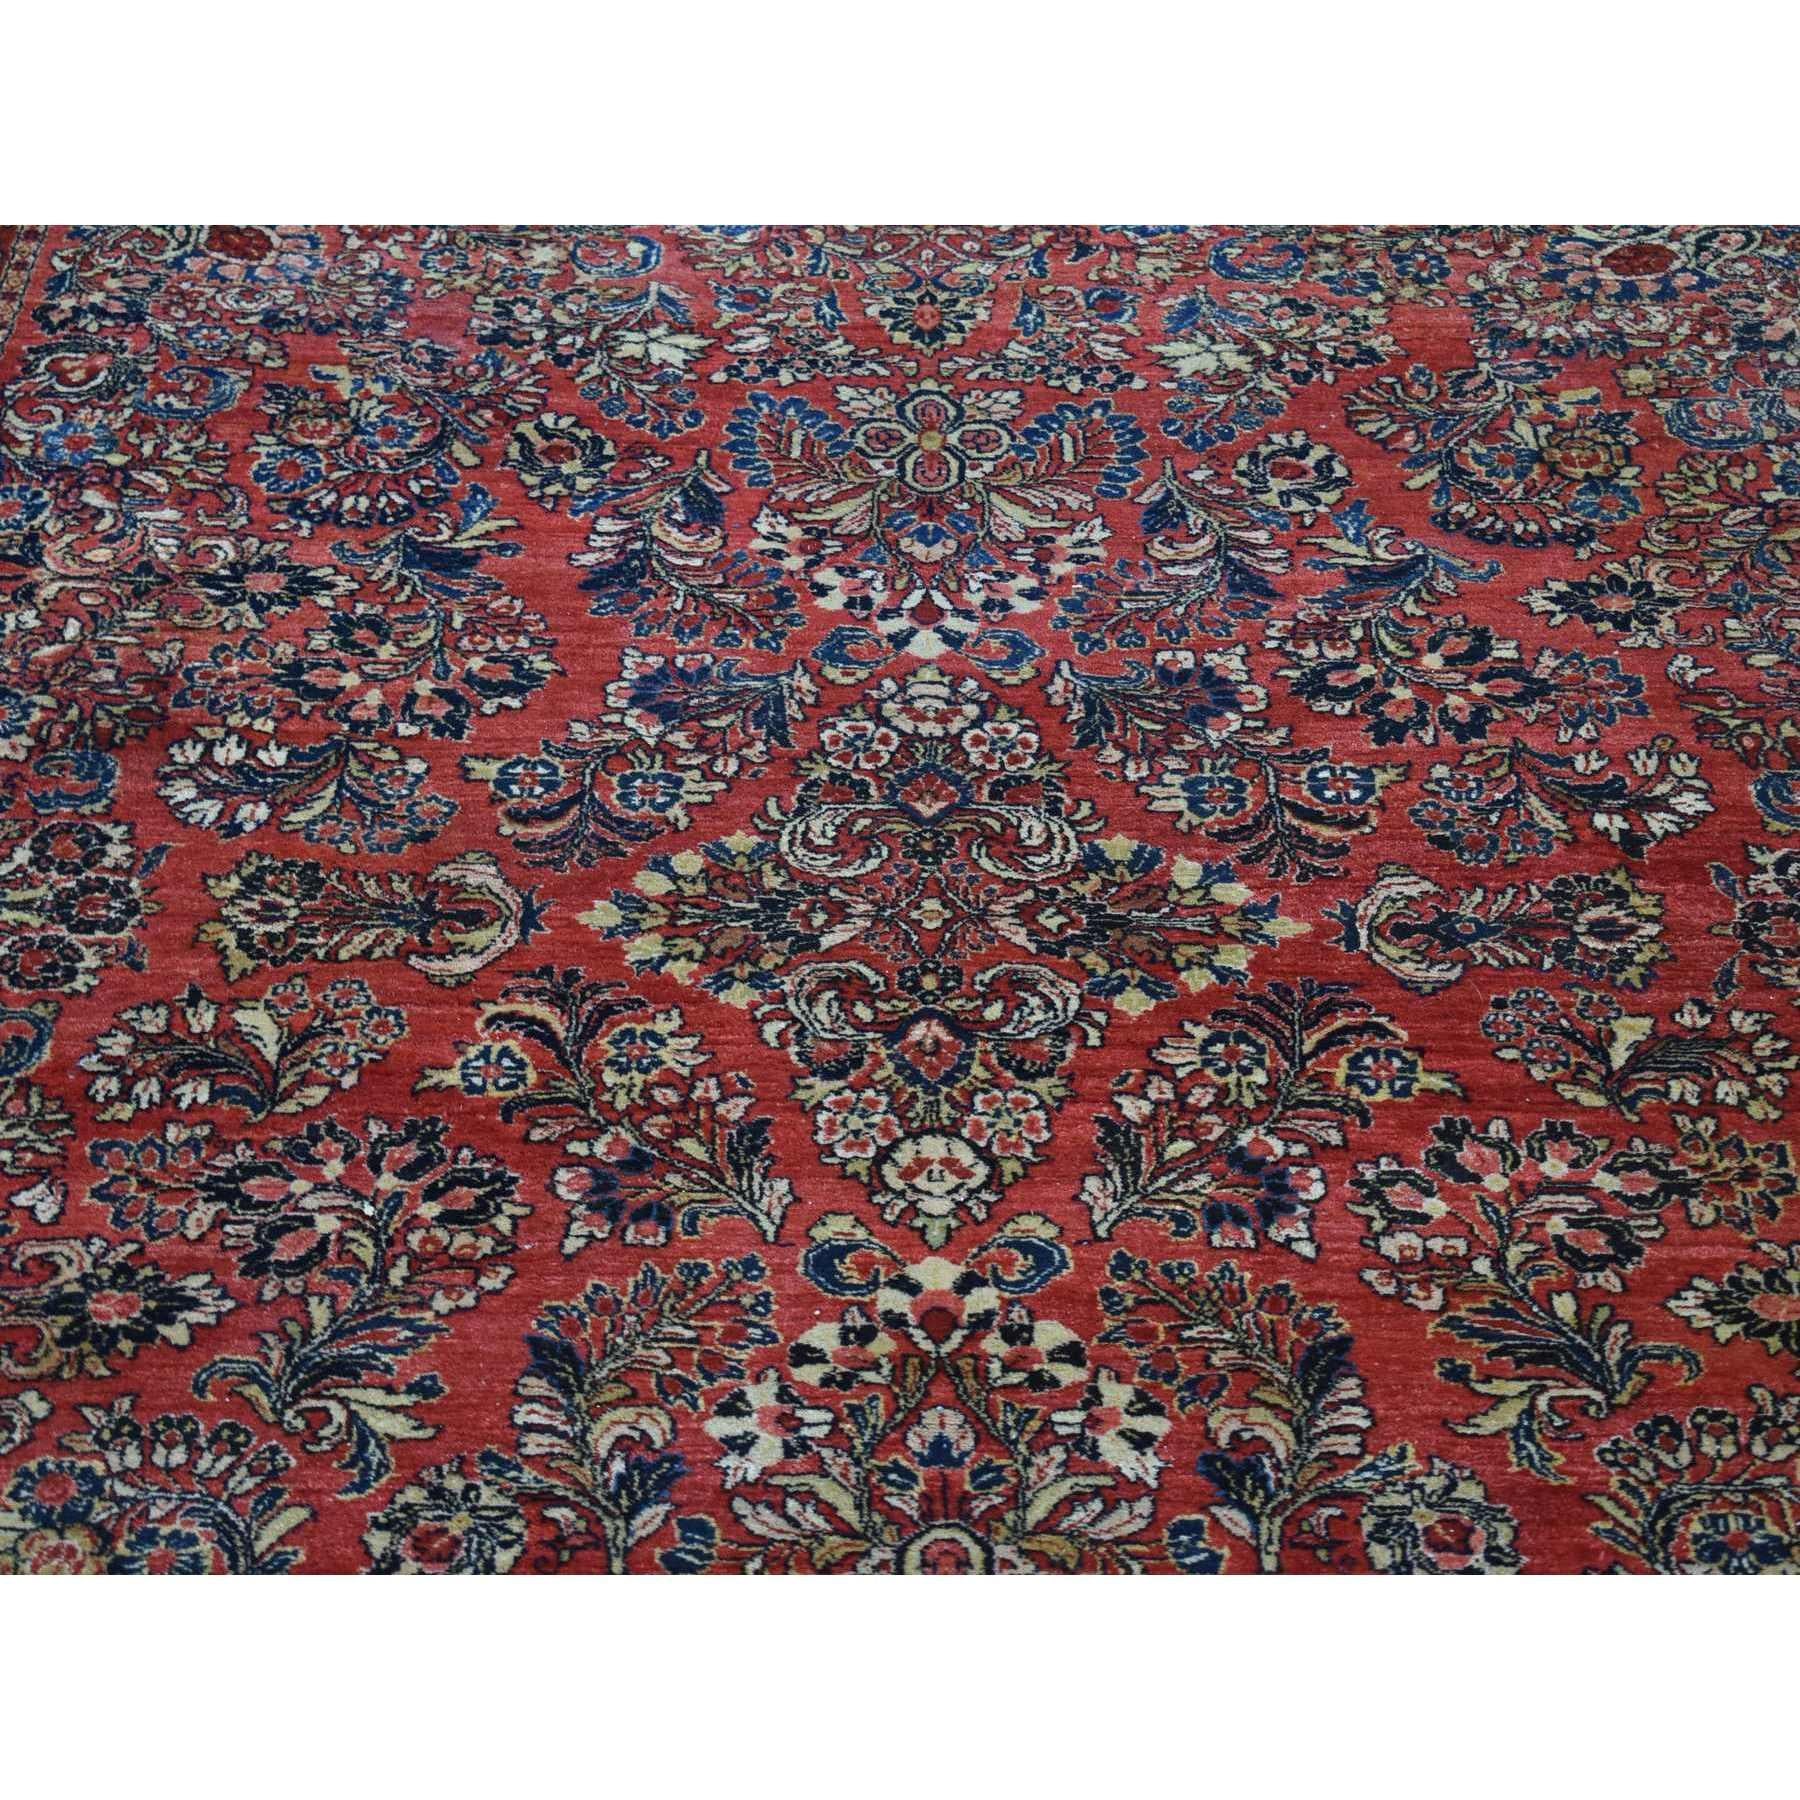 Tomato Red, Antique Persian Sarouk, Flower Bouquet Design, Hand Knotted Wool Rug For Sale 2